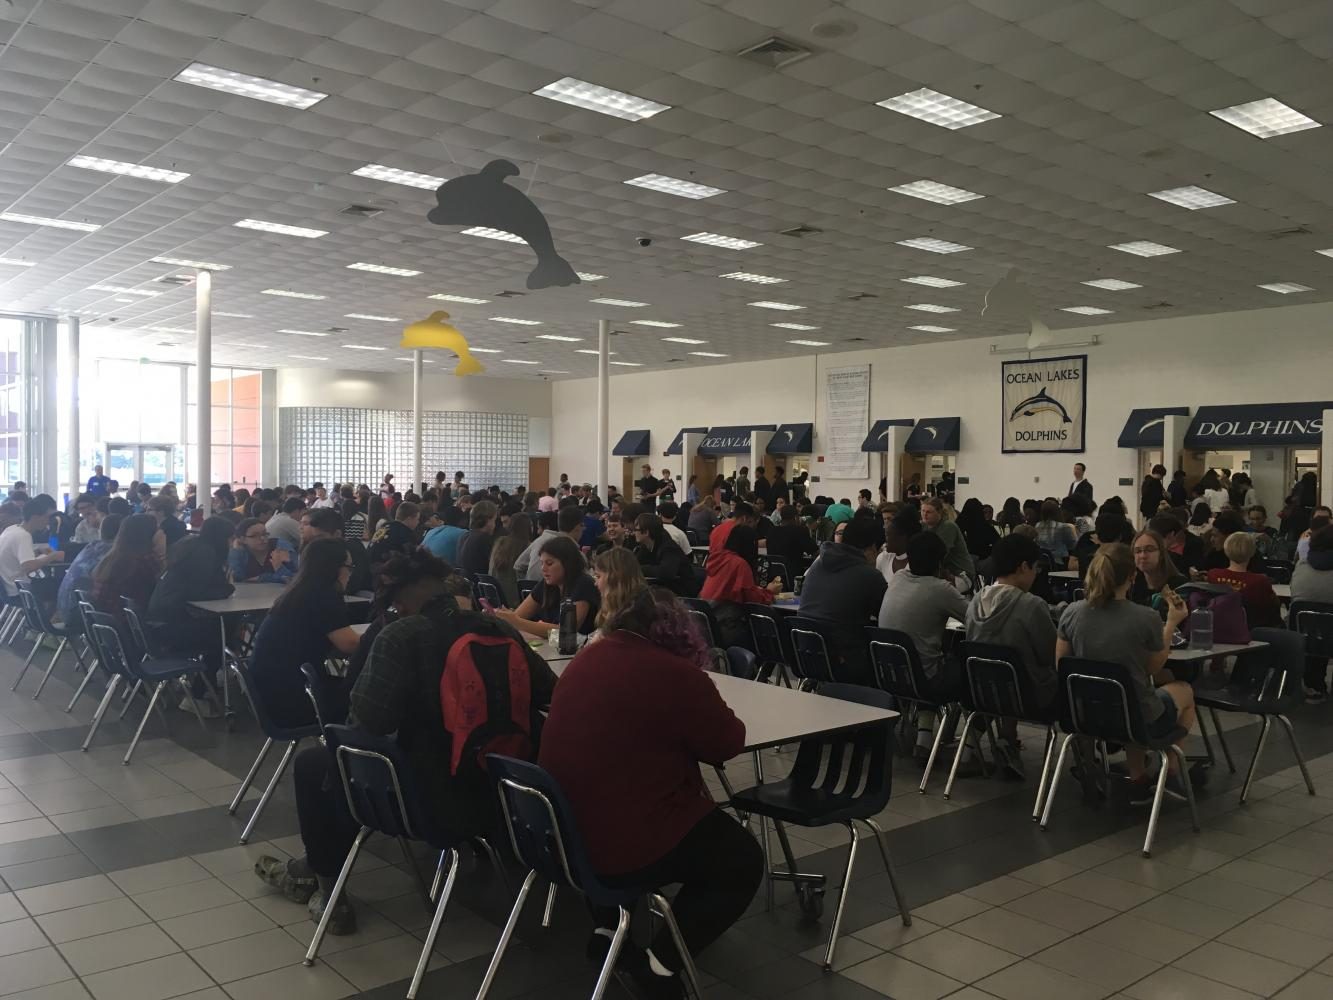 Students eat their lunch in the cafeteria during third lunch on May 2.